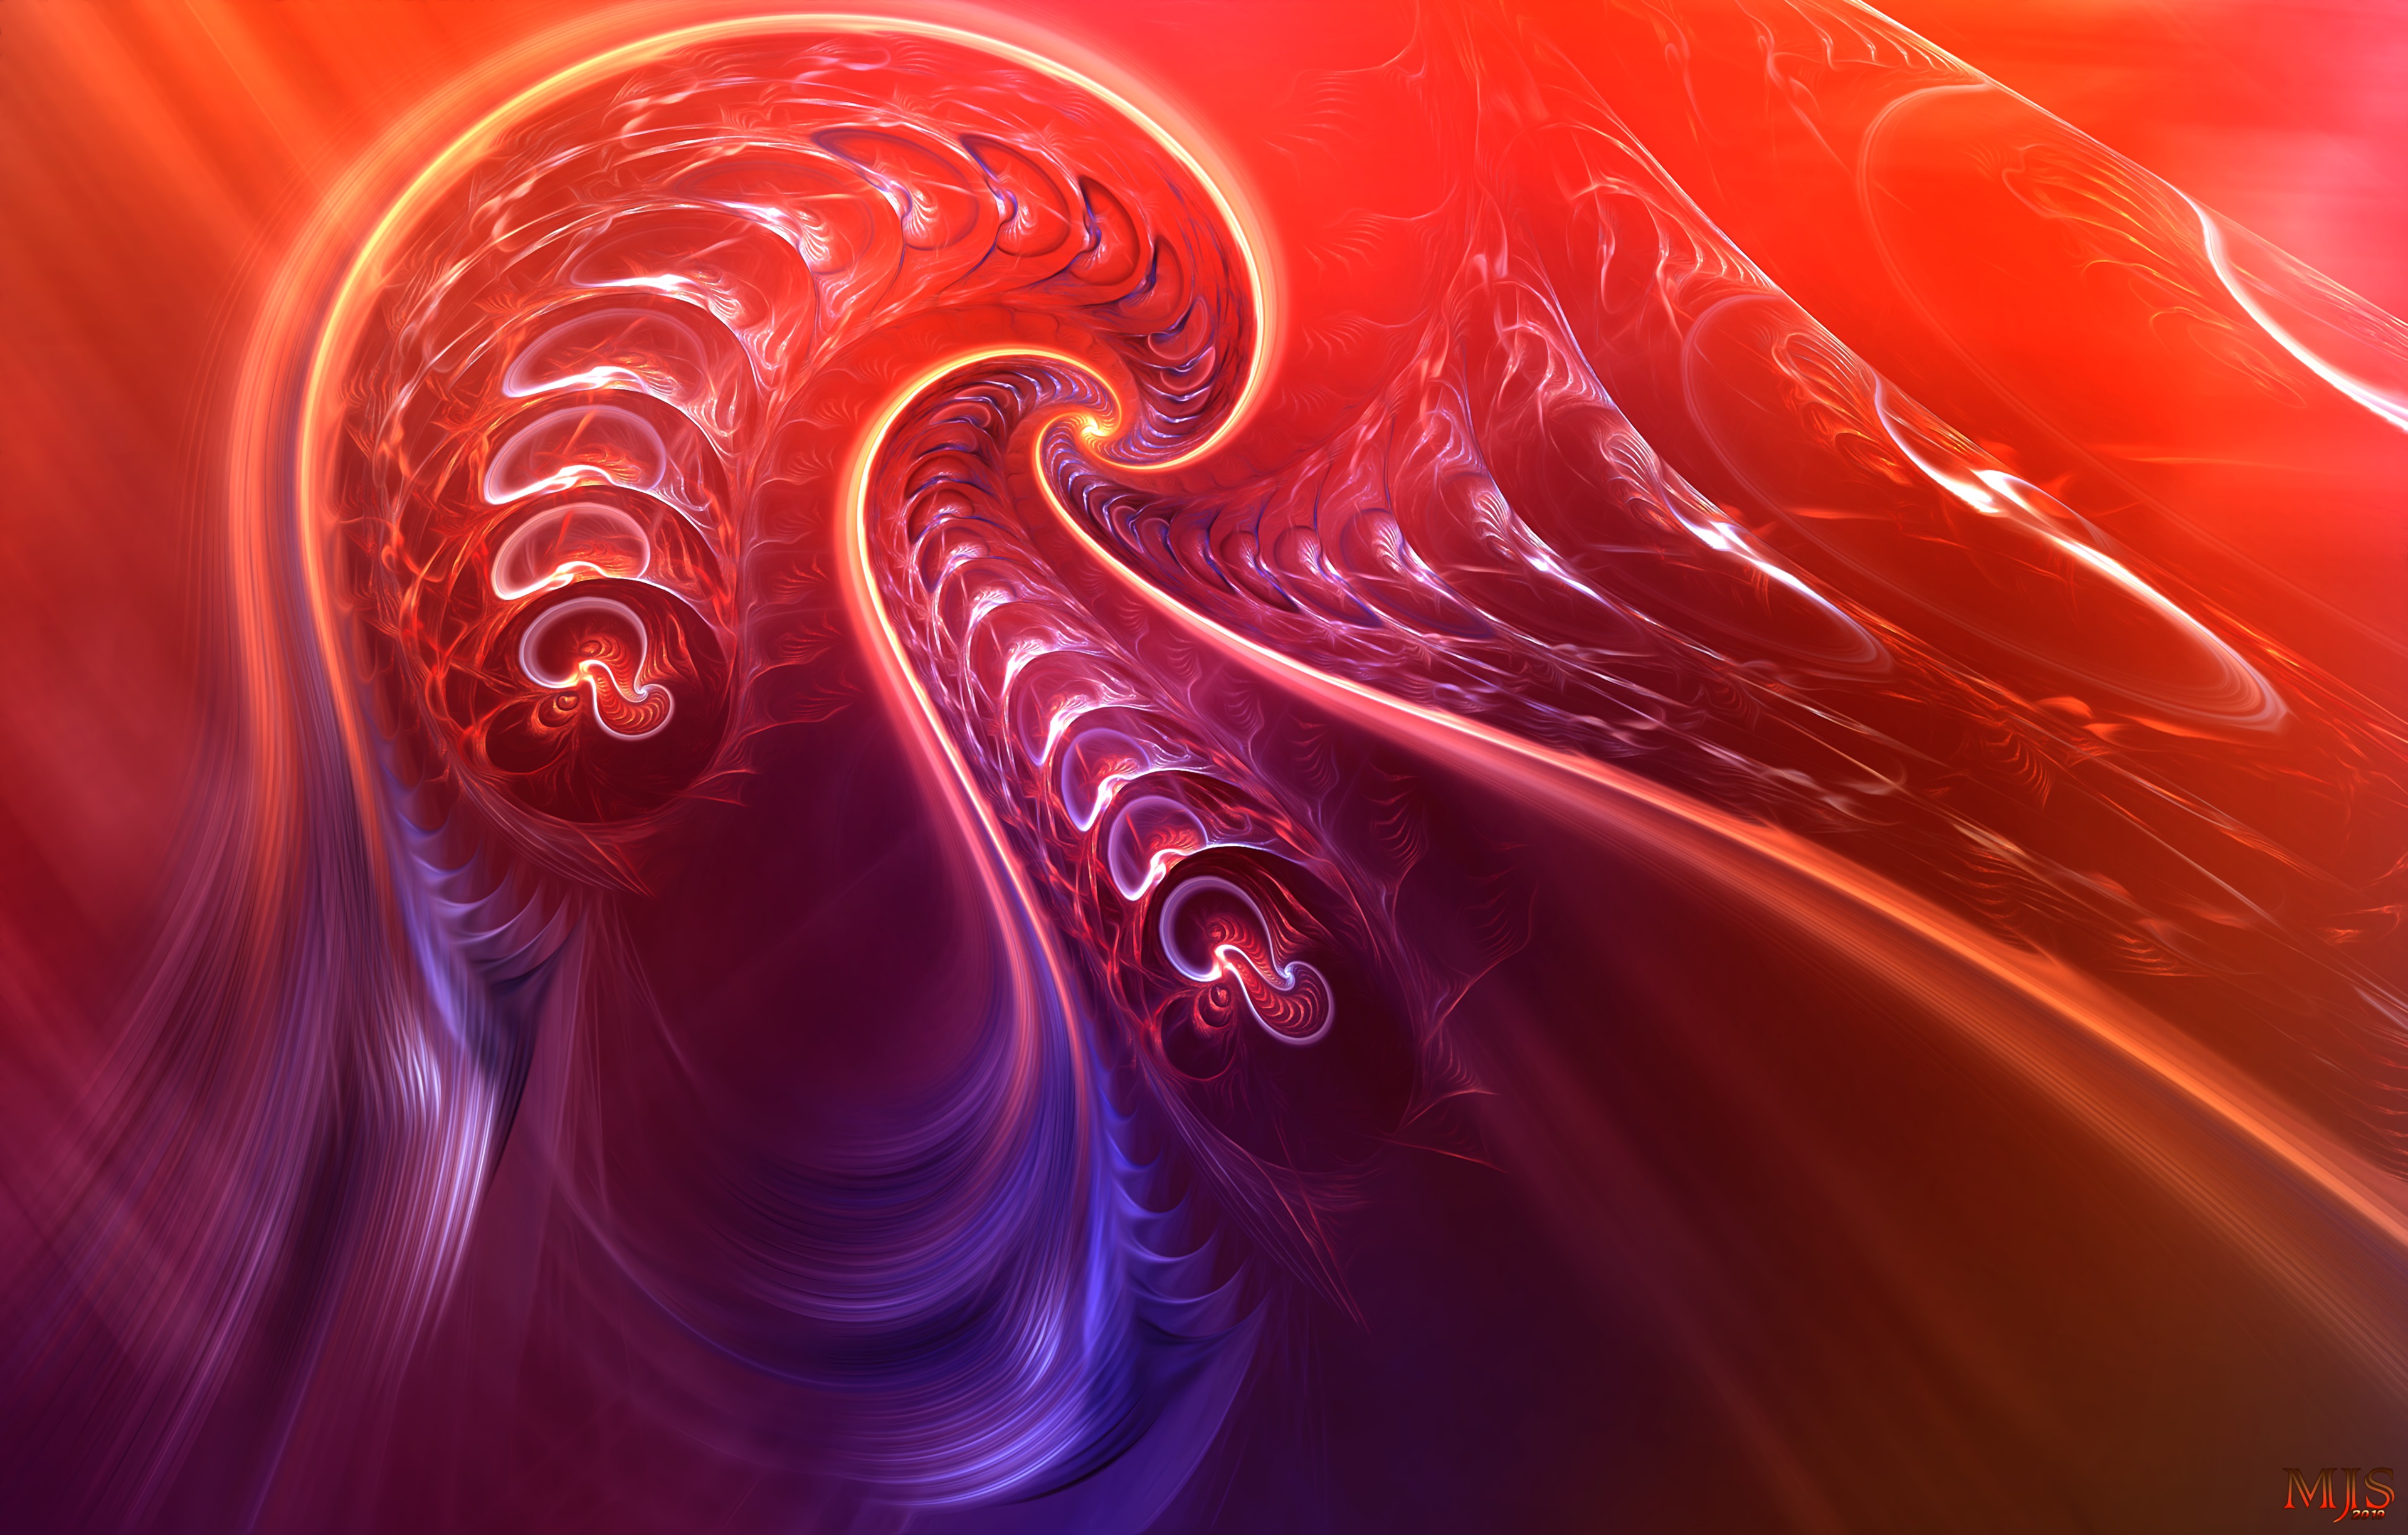 confused, abstract, bright, fractal, intricate, swirling, involute